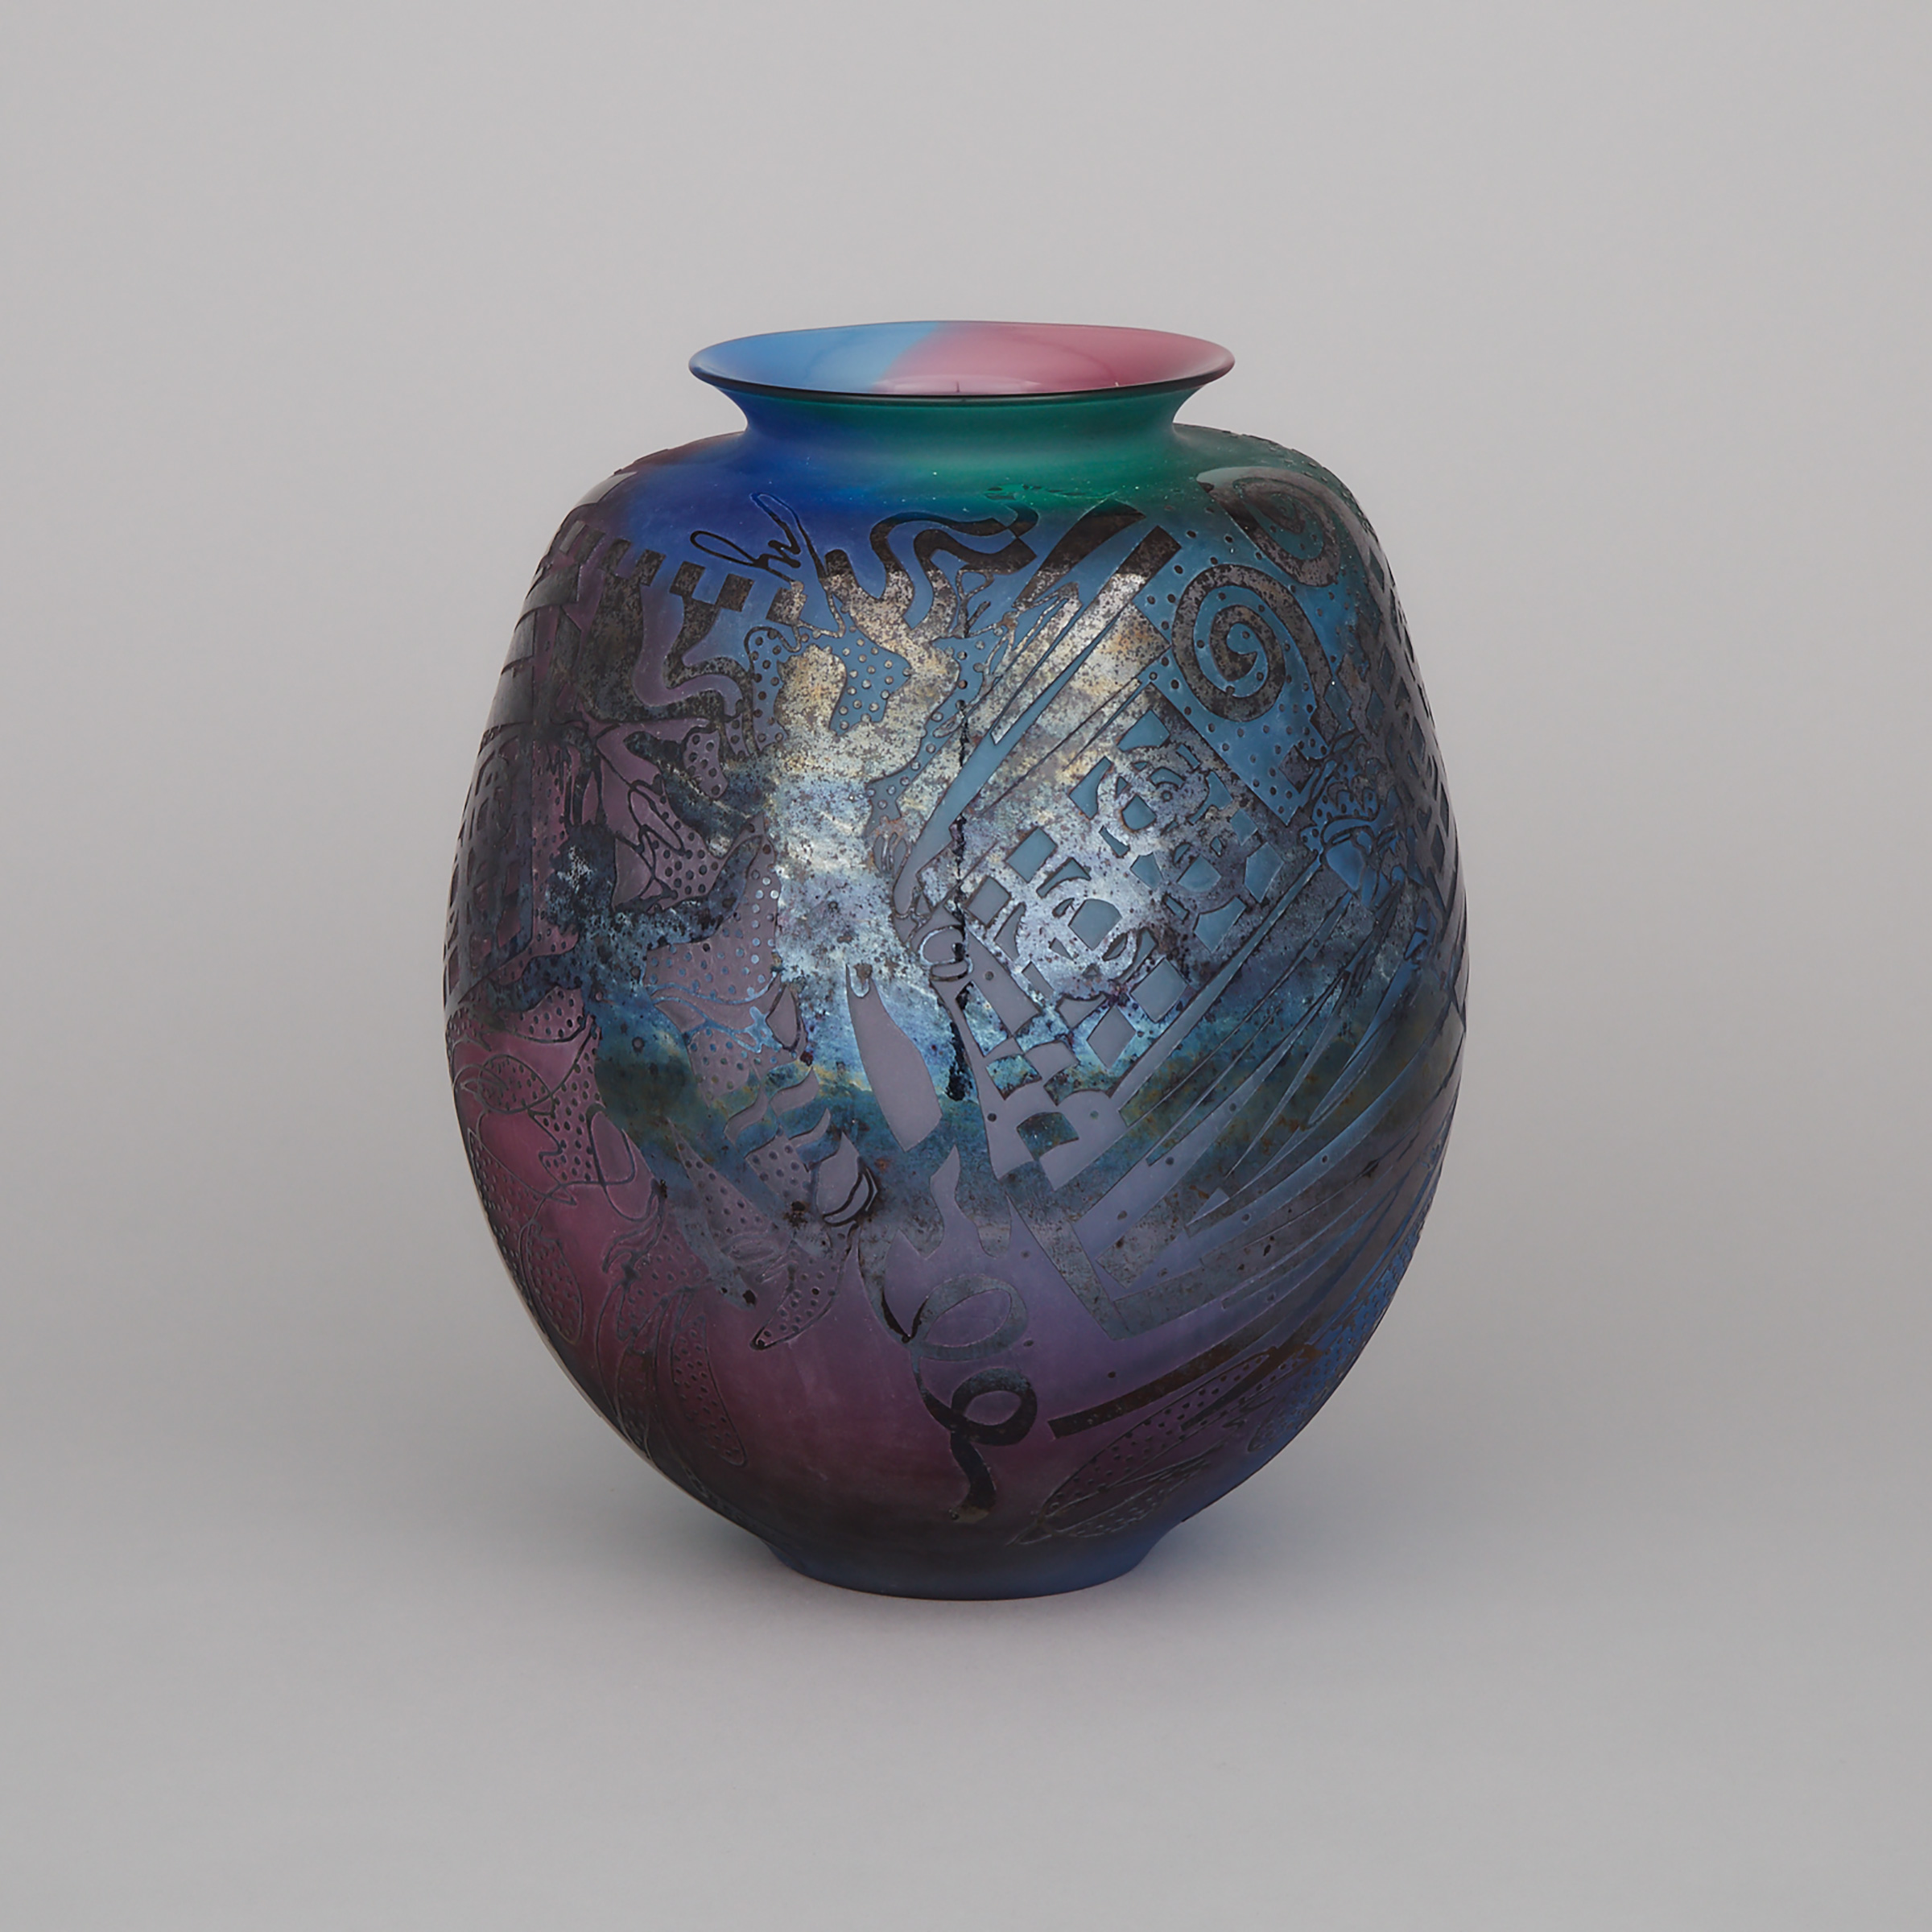 Heather Wood (Canadian, b.1953) and John Kepkiewicz (Canadian, b.1955), 'Division', Acid Etched Glass Vase, 1989